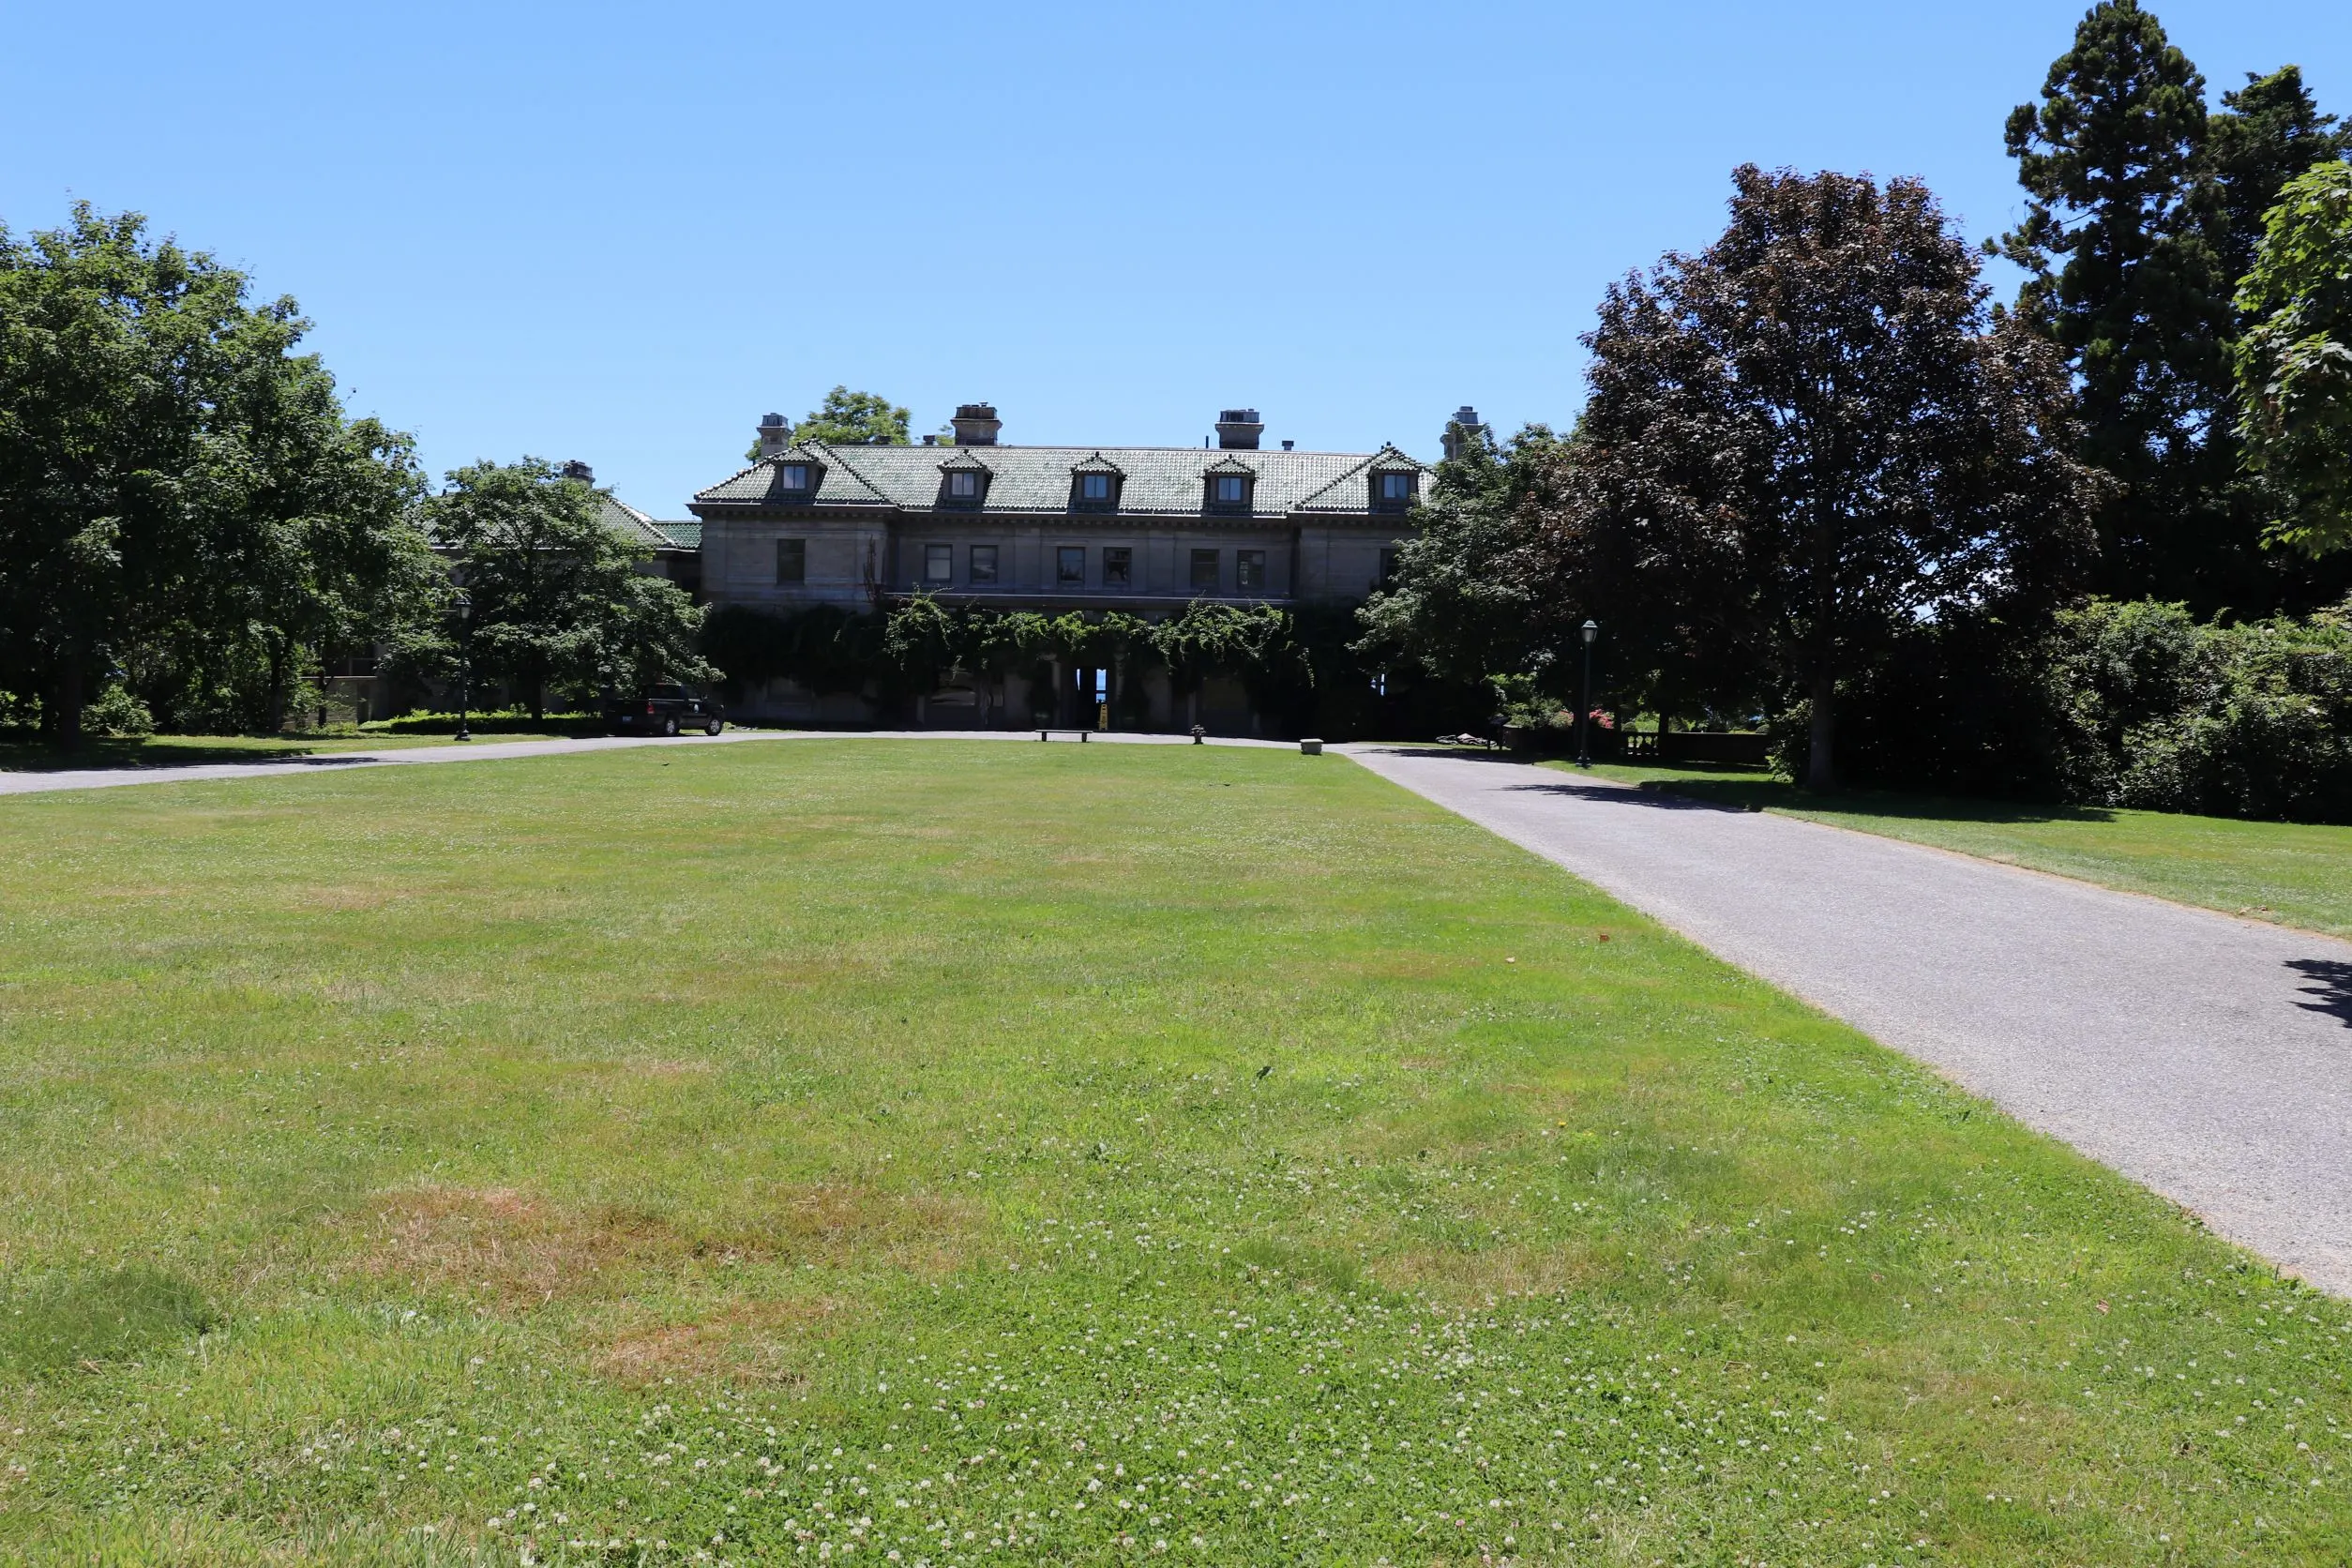 Image of the Eolia's mansion at Harkness Park in Waterford Ct.